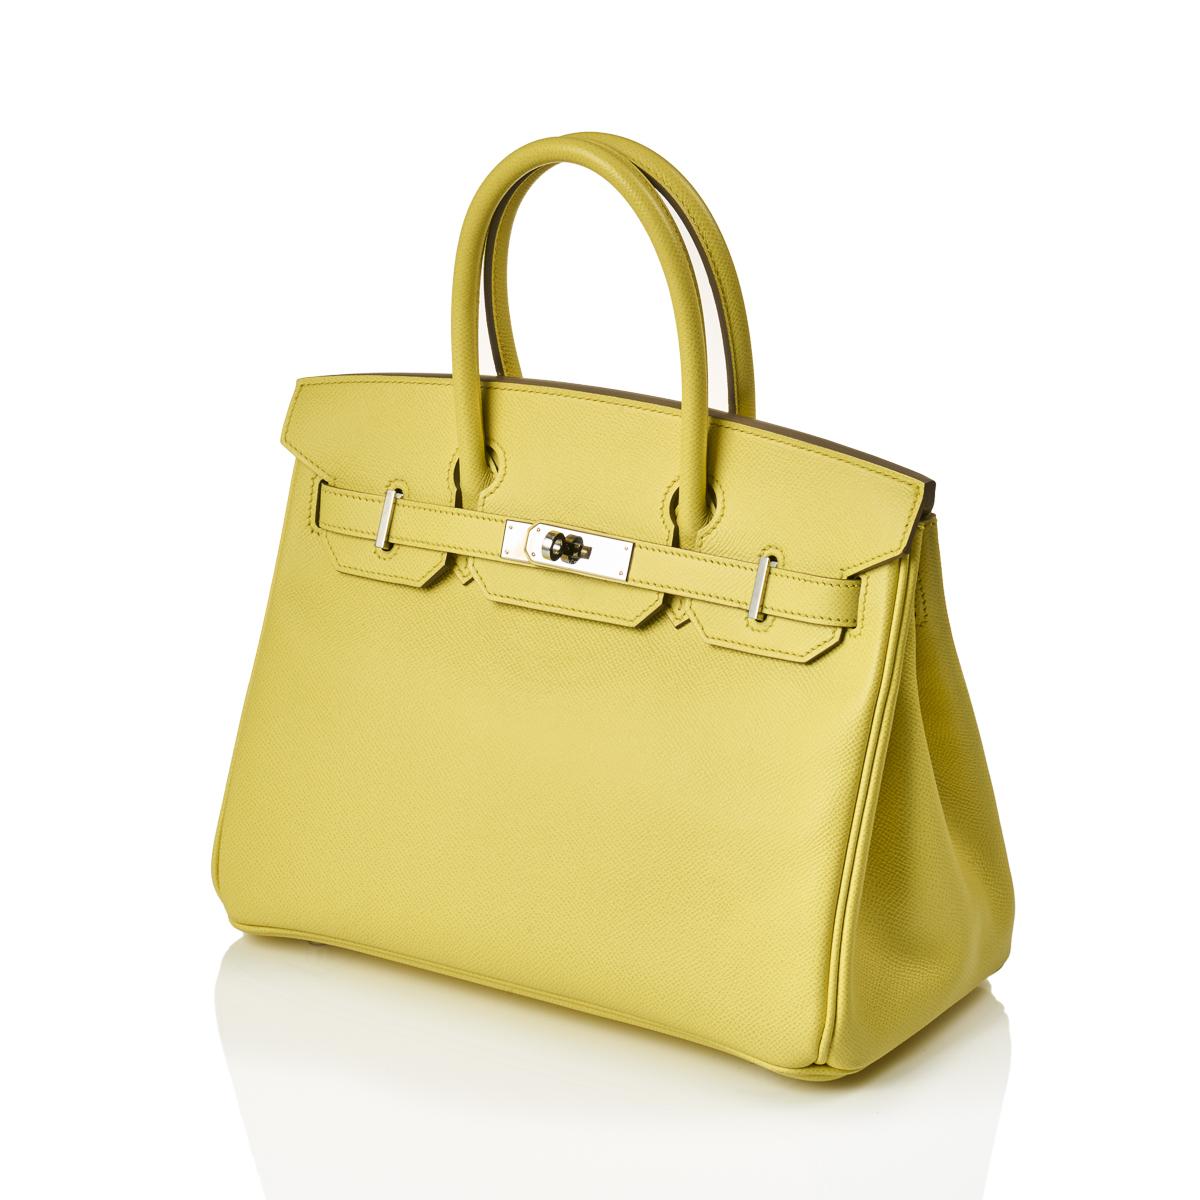 HERMES Birkin Size 25 Gold Swift Leather– GALLERY RARE Global Online Store